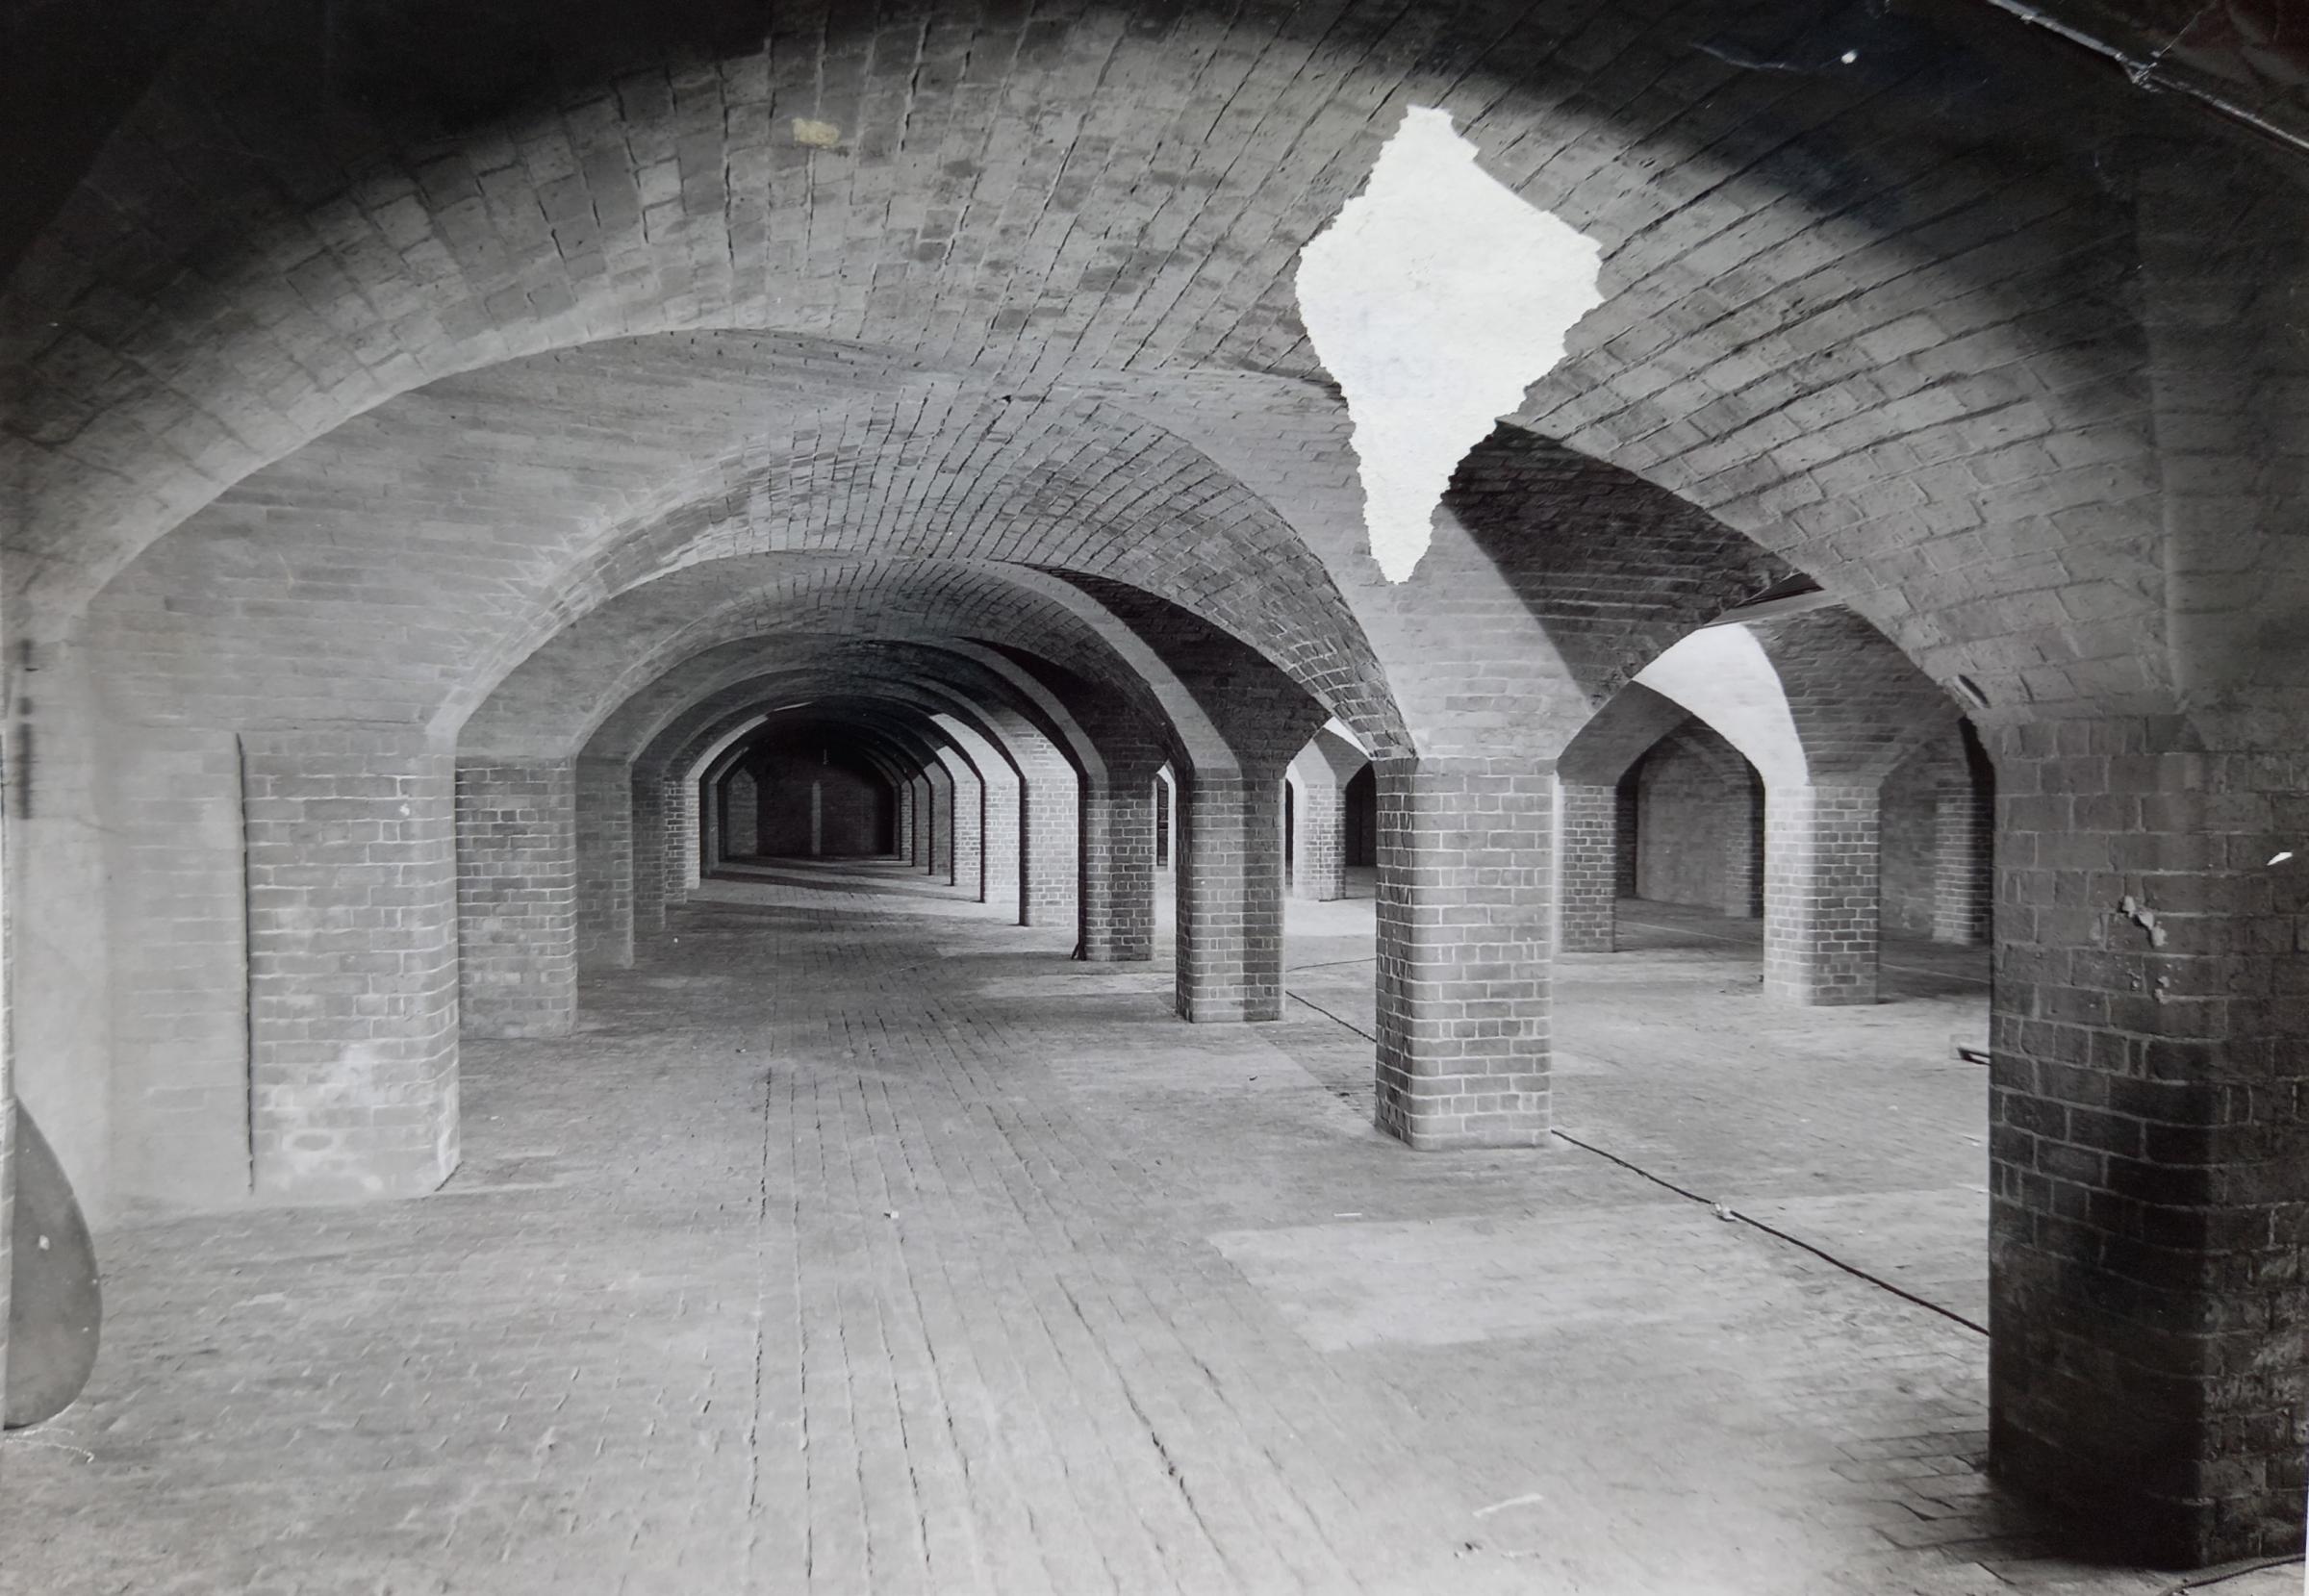 The factory’s cellars in the 1970s before conversion into the Mighty U home improvement store. The white mark is not a ghost, but damage to the print